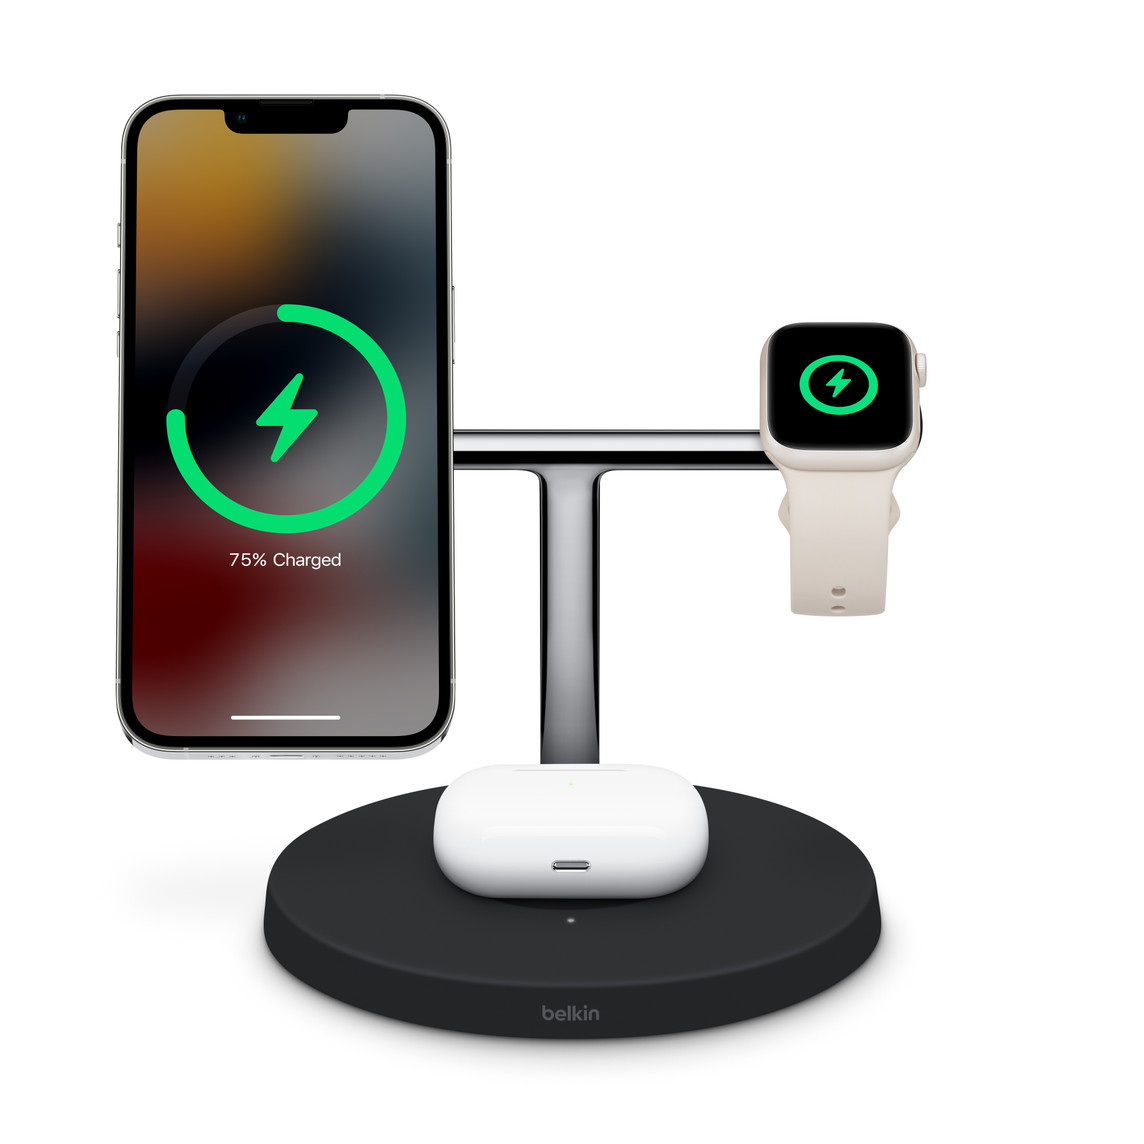 Belkin Boost Charge Pro 3-in-1 Wireless Charger with MagSafe simultaneously charges, iPhone, Apple Watch, and Wireless Charging Case for AirPods.